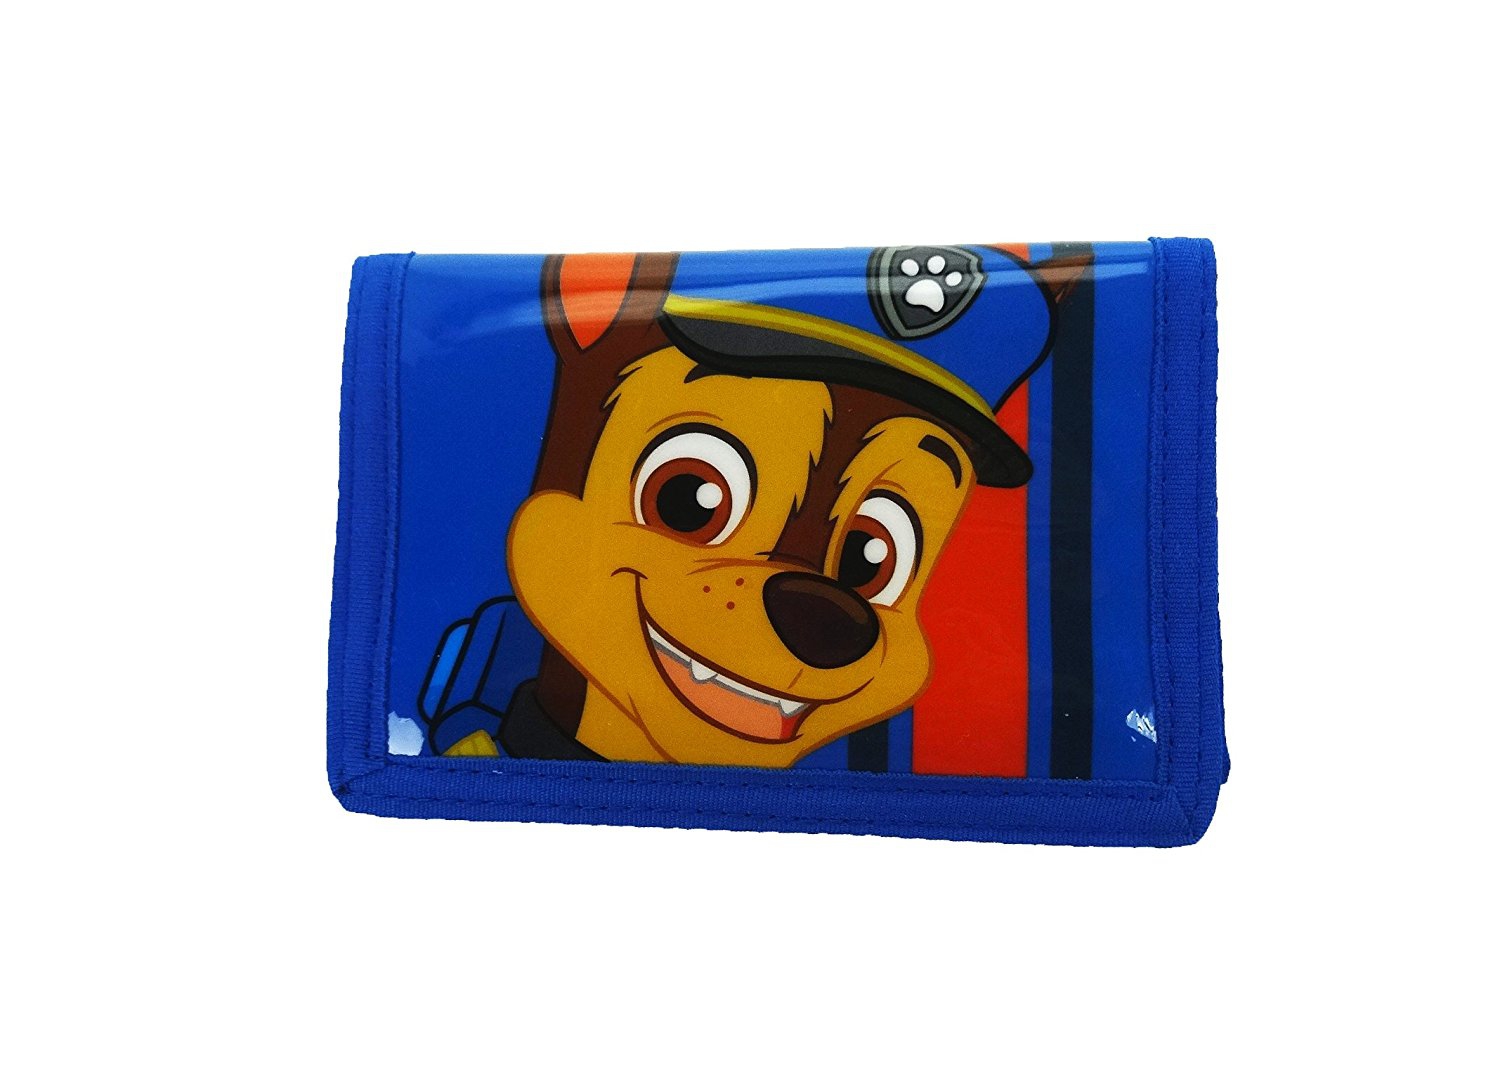 Paw Patrol 'Chase' Trifold Wallet